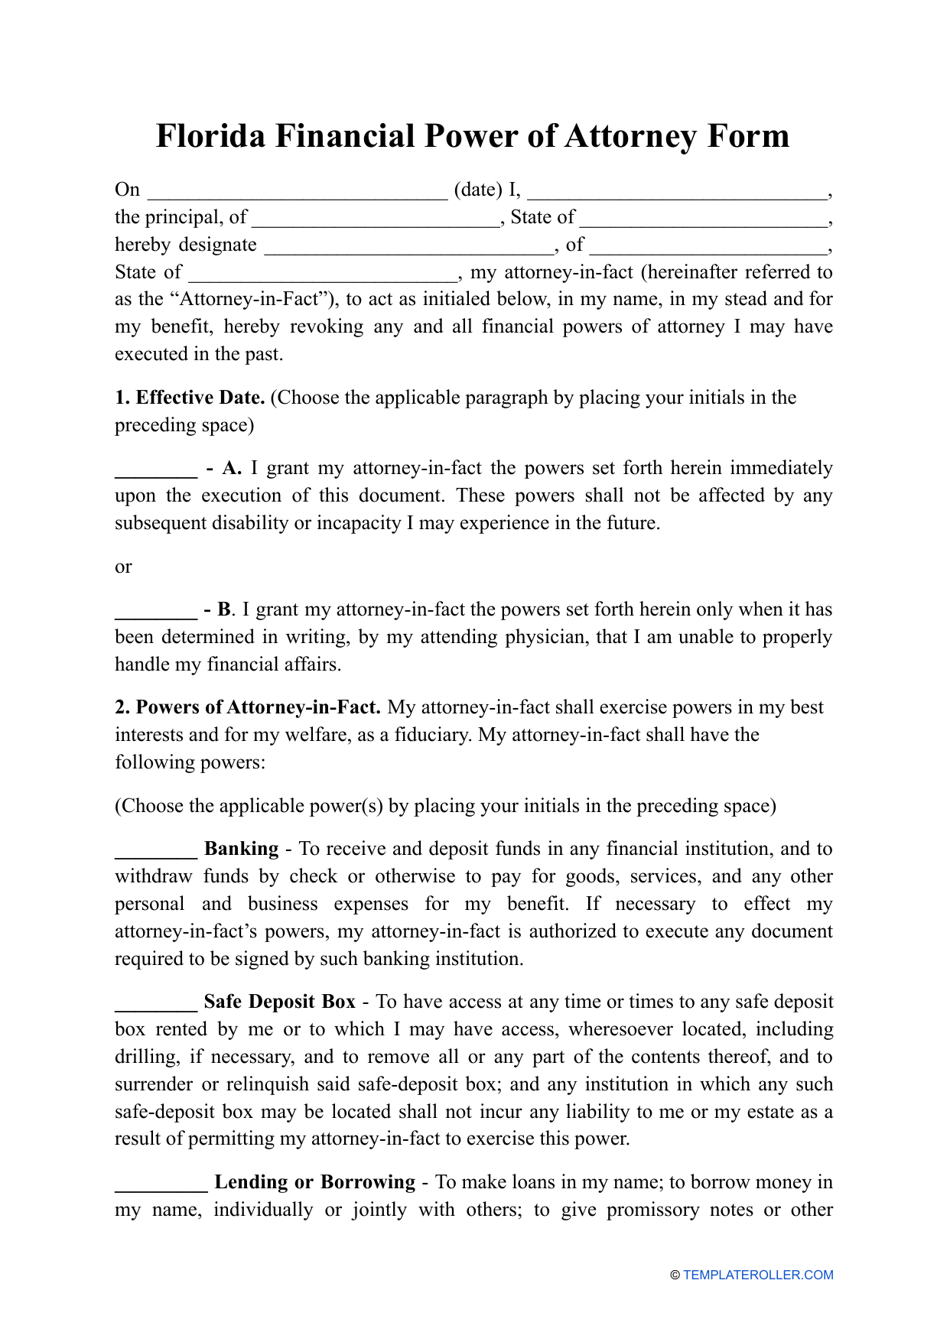 Financial Power of Attorney Form - Florida, Page 1